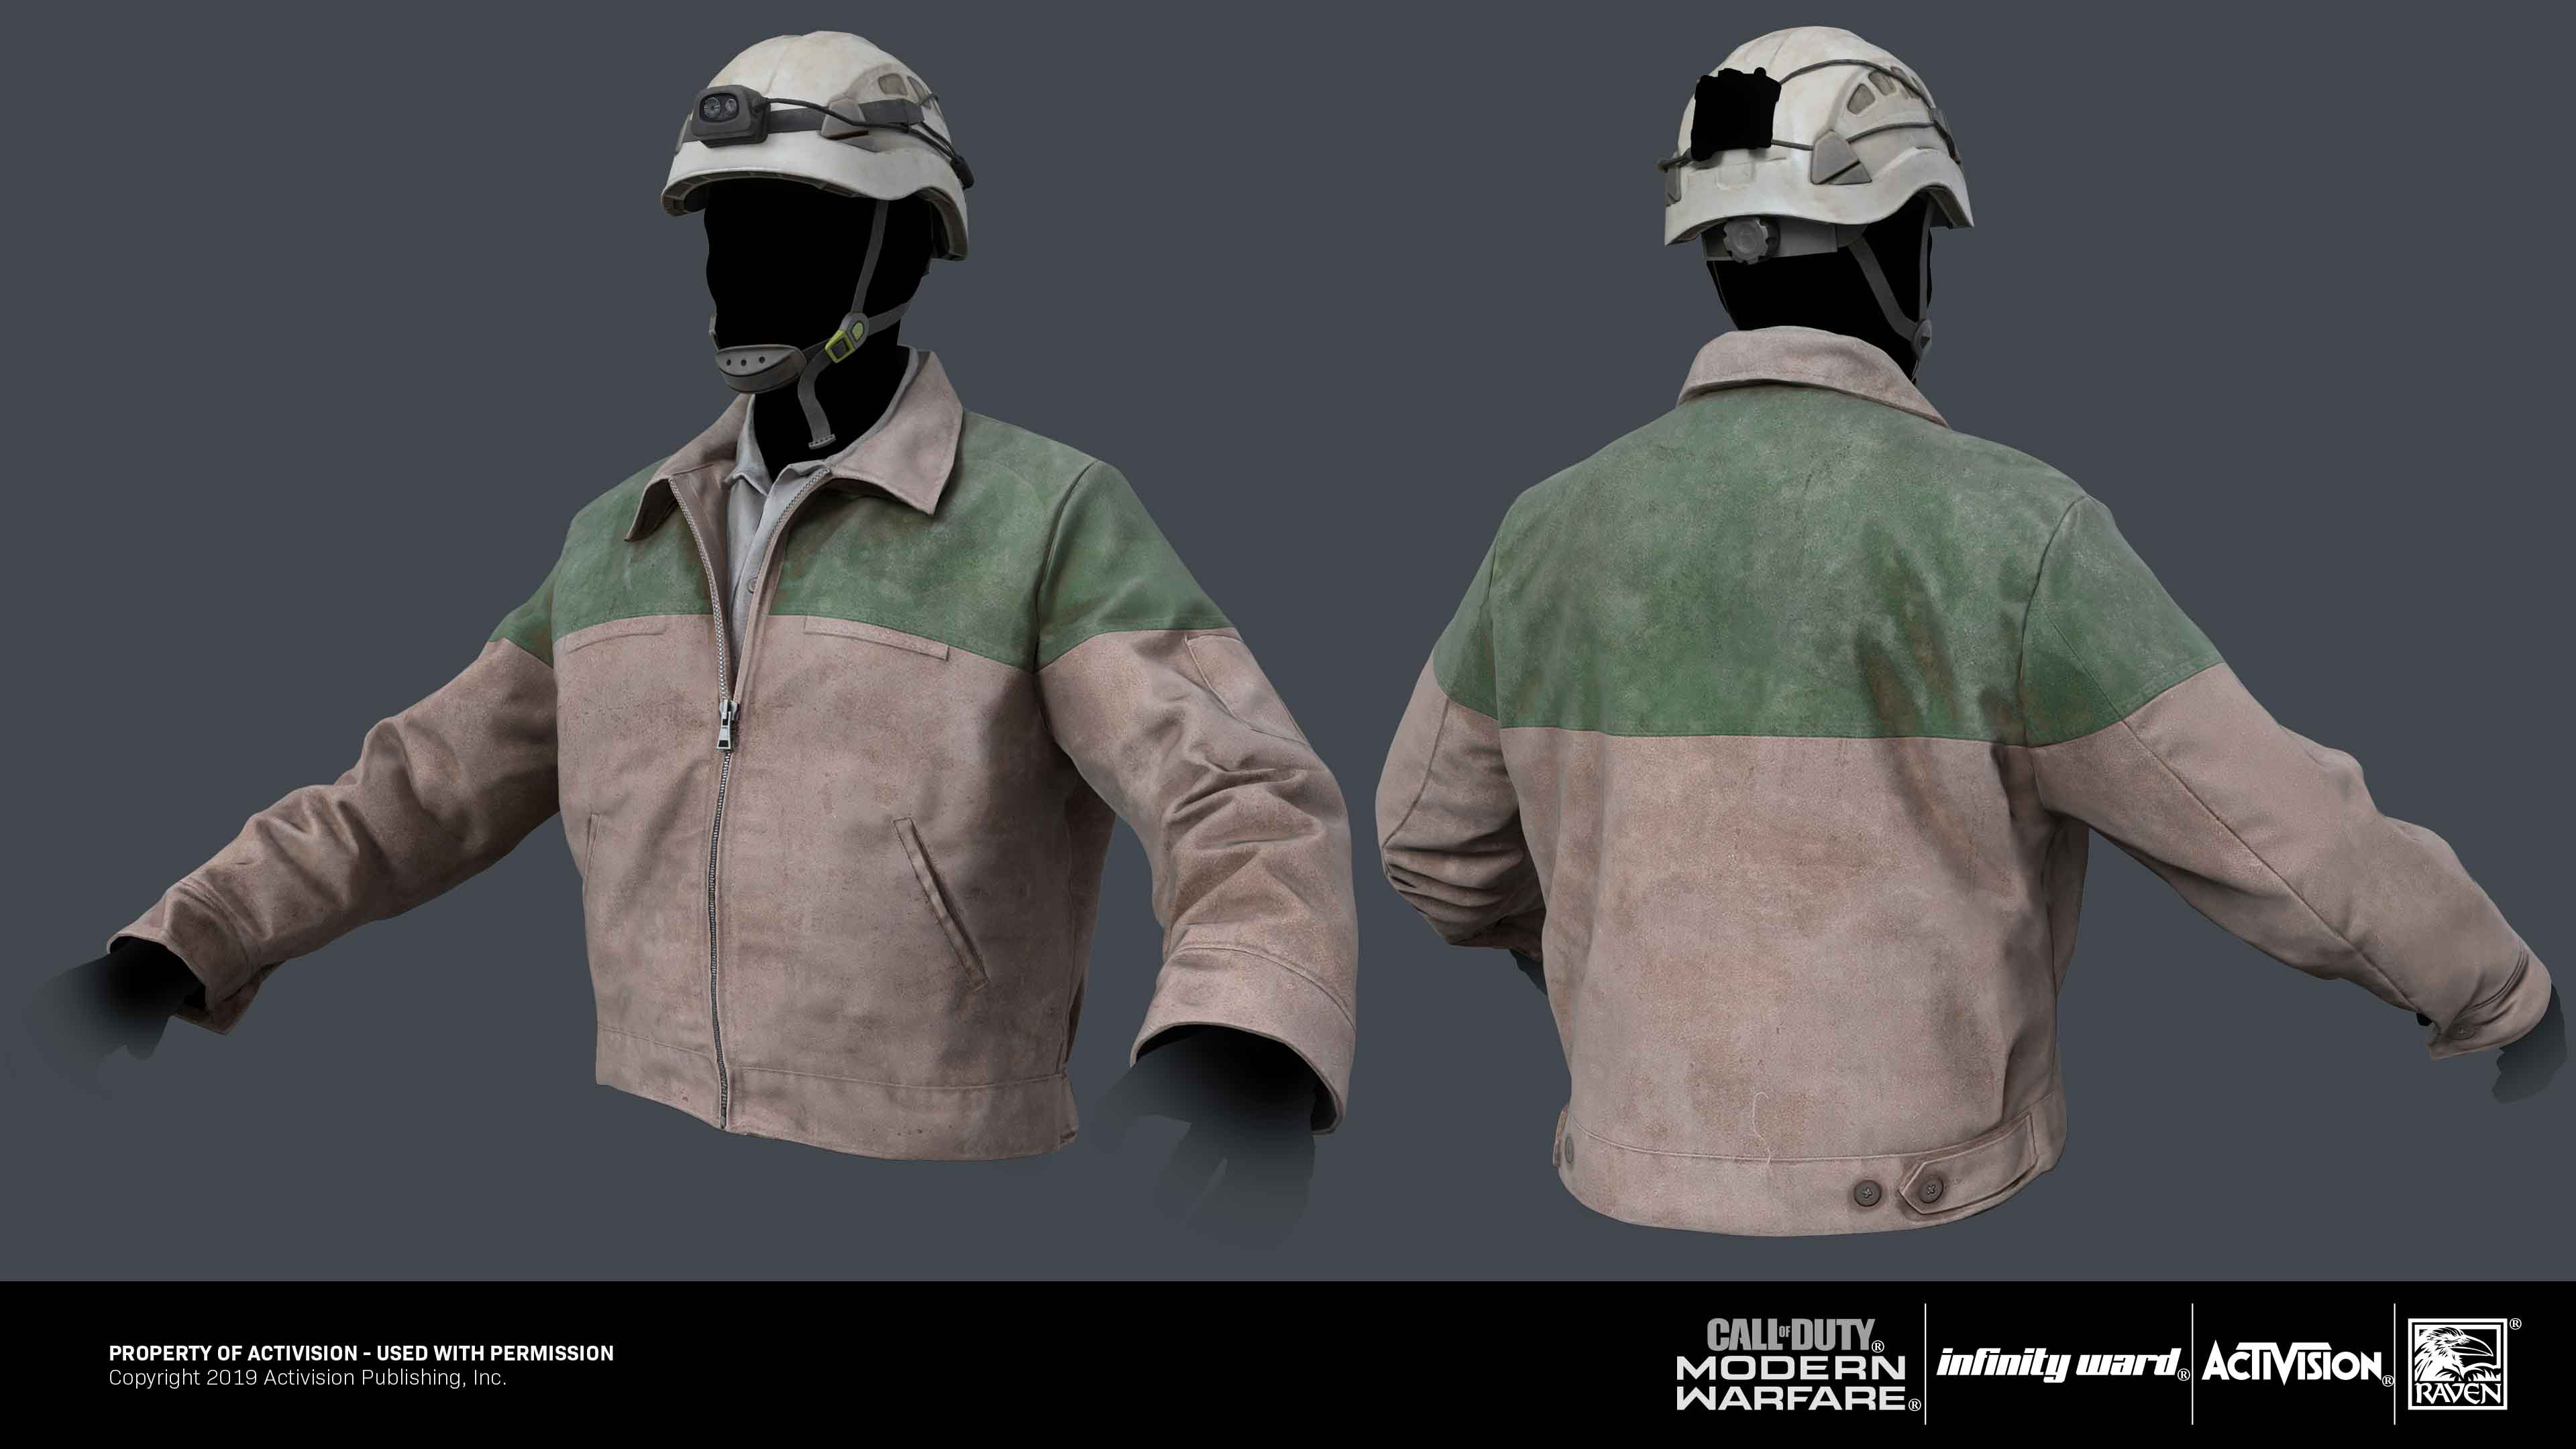 White Helmets: Highpoly/ scan cleanup, lowpoly, bakes and textures/ cleanup. 